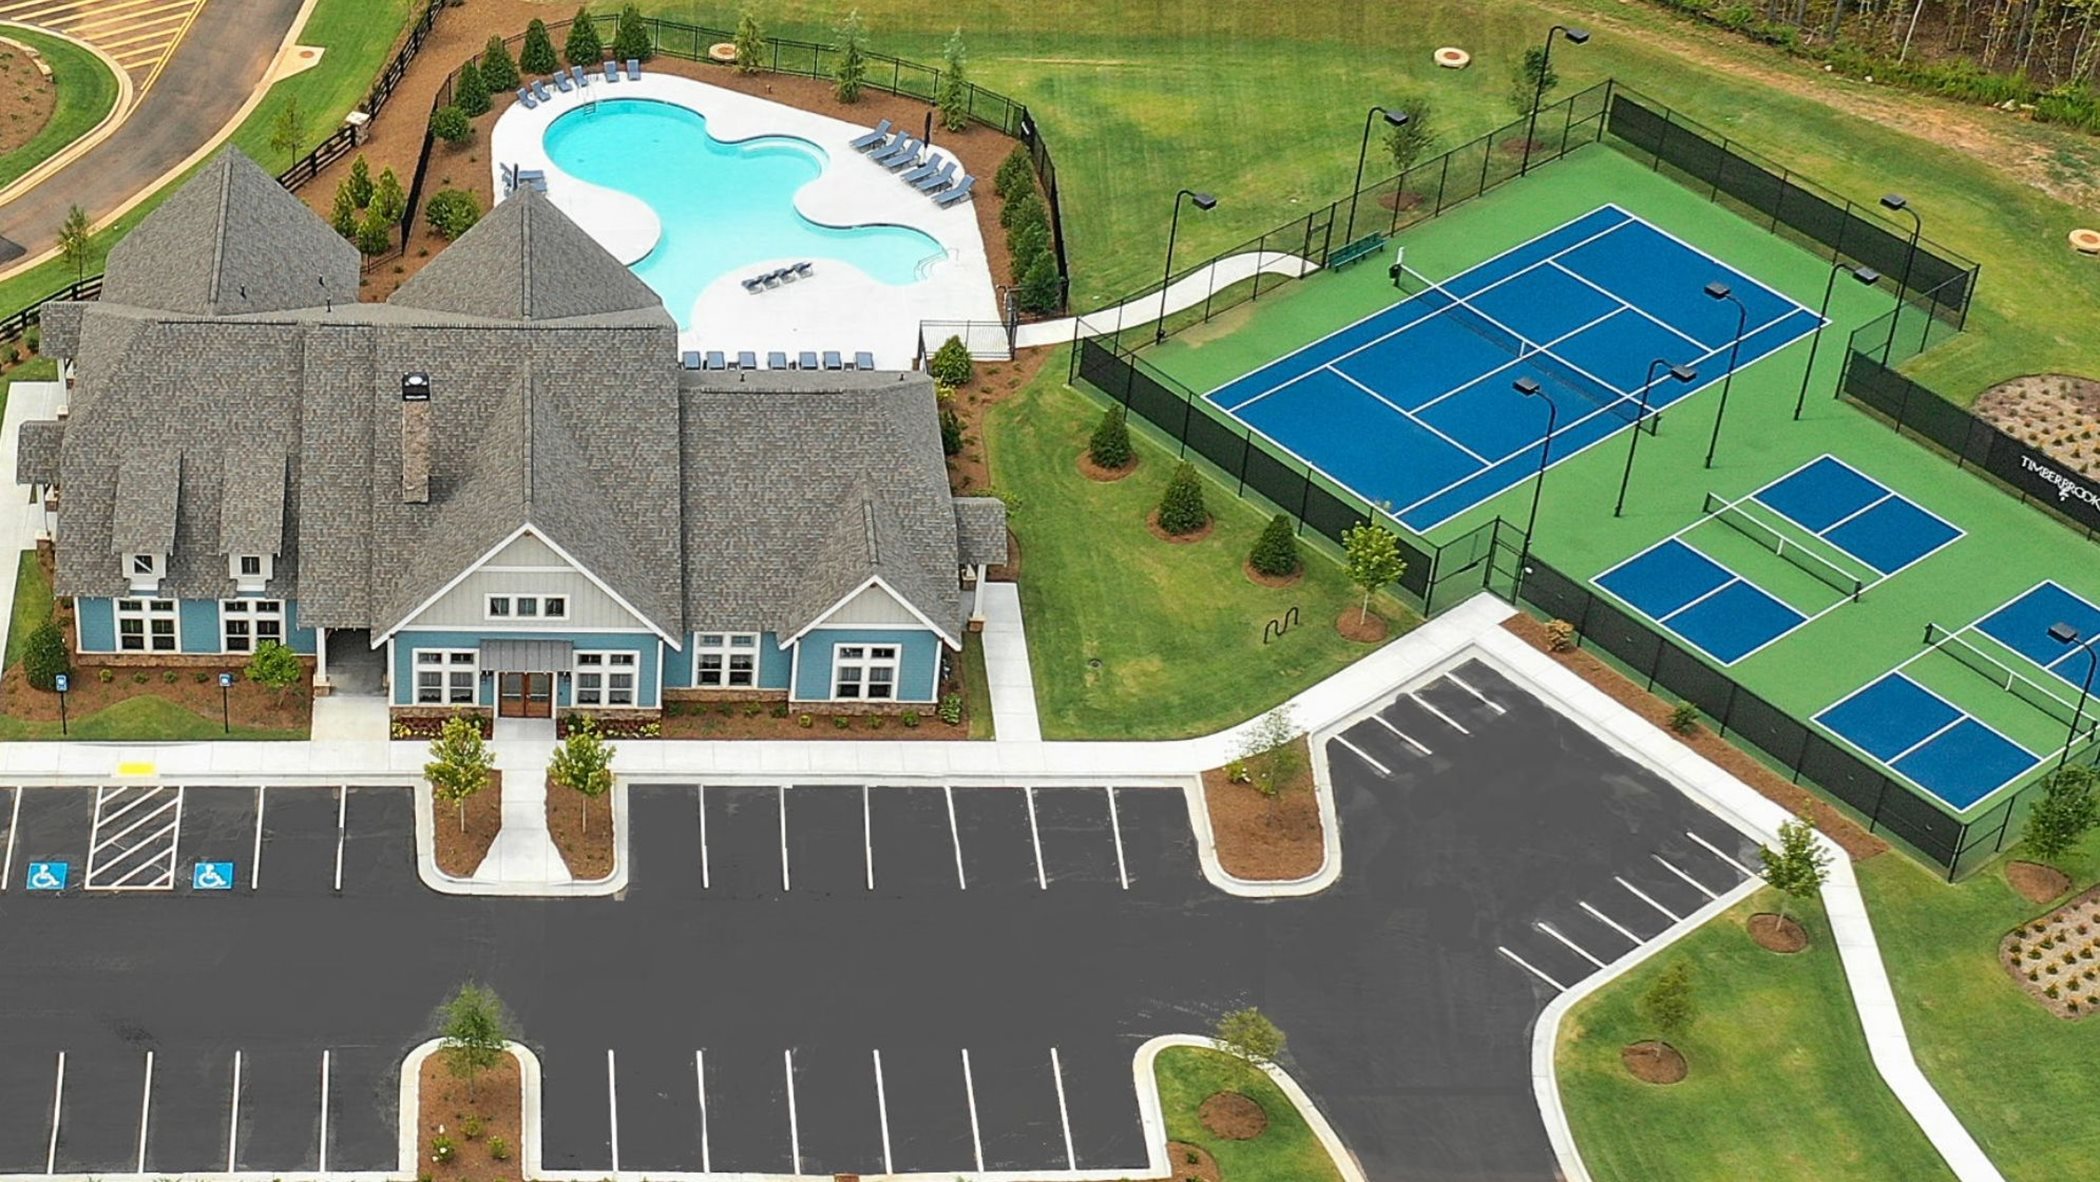 A blue, white, and grey clubhouse in front of a spacious parking lot. In the backyard there is a whimsically shaped pool and sport court with tennis and pickle ball.